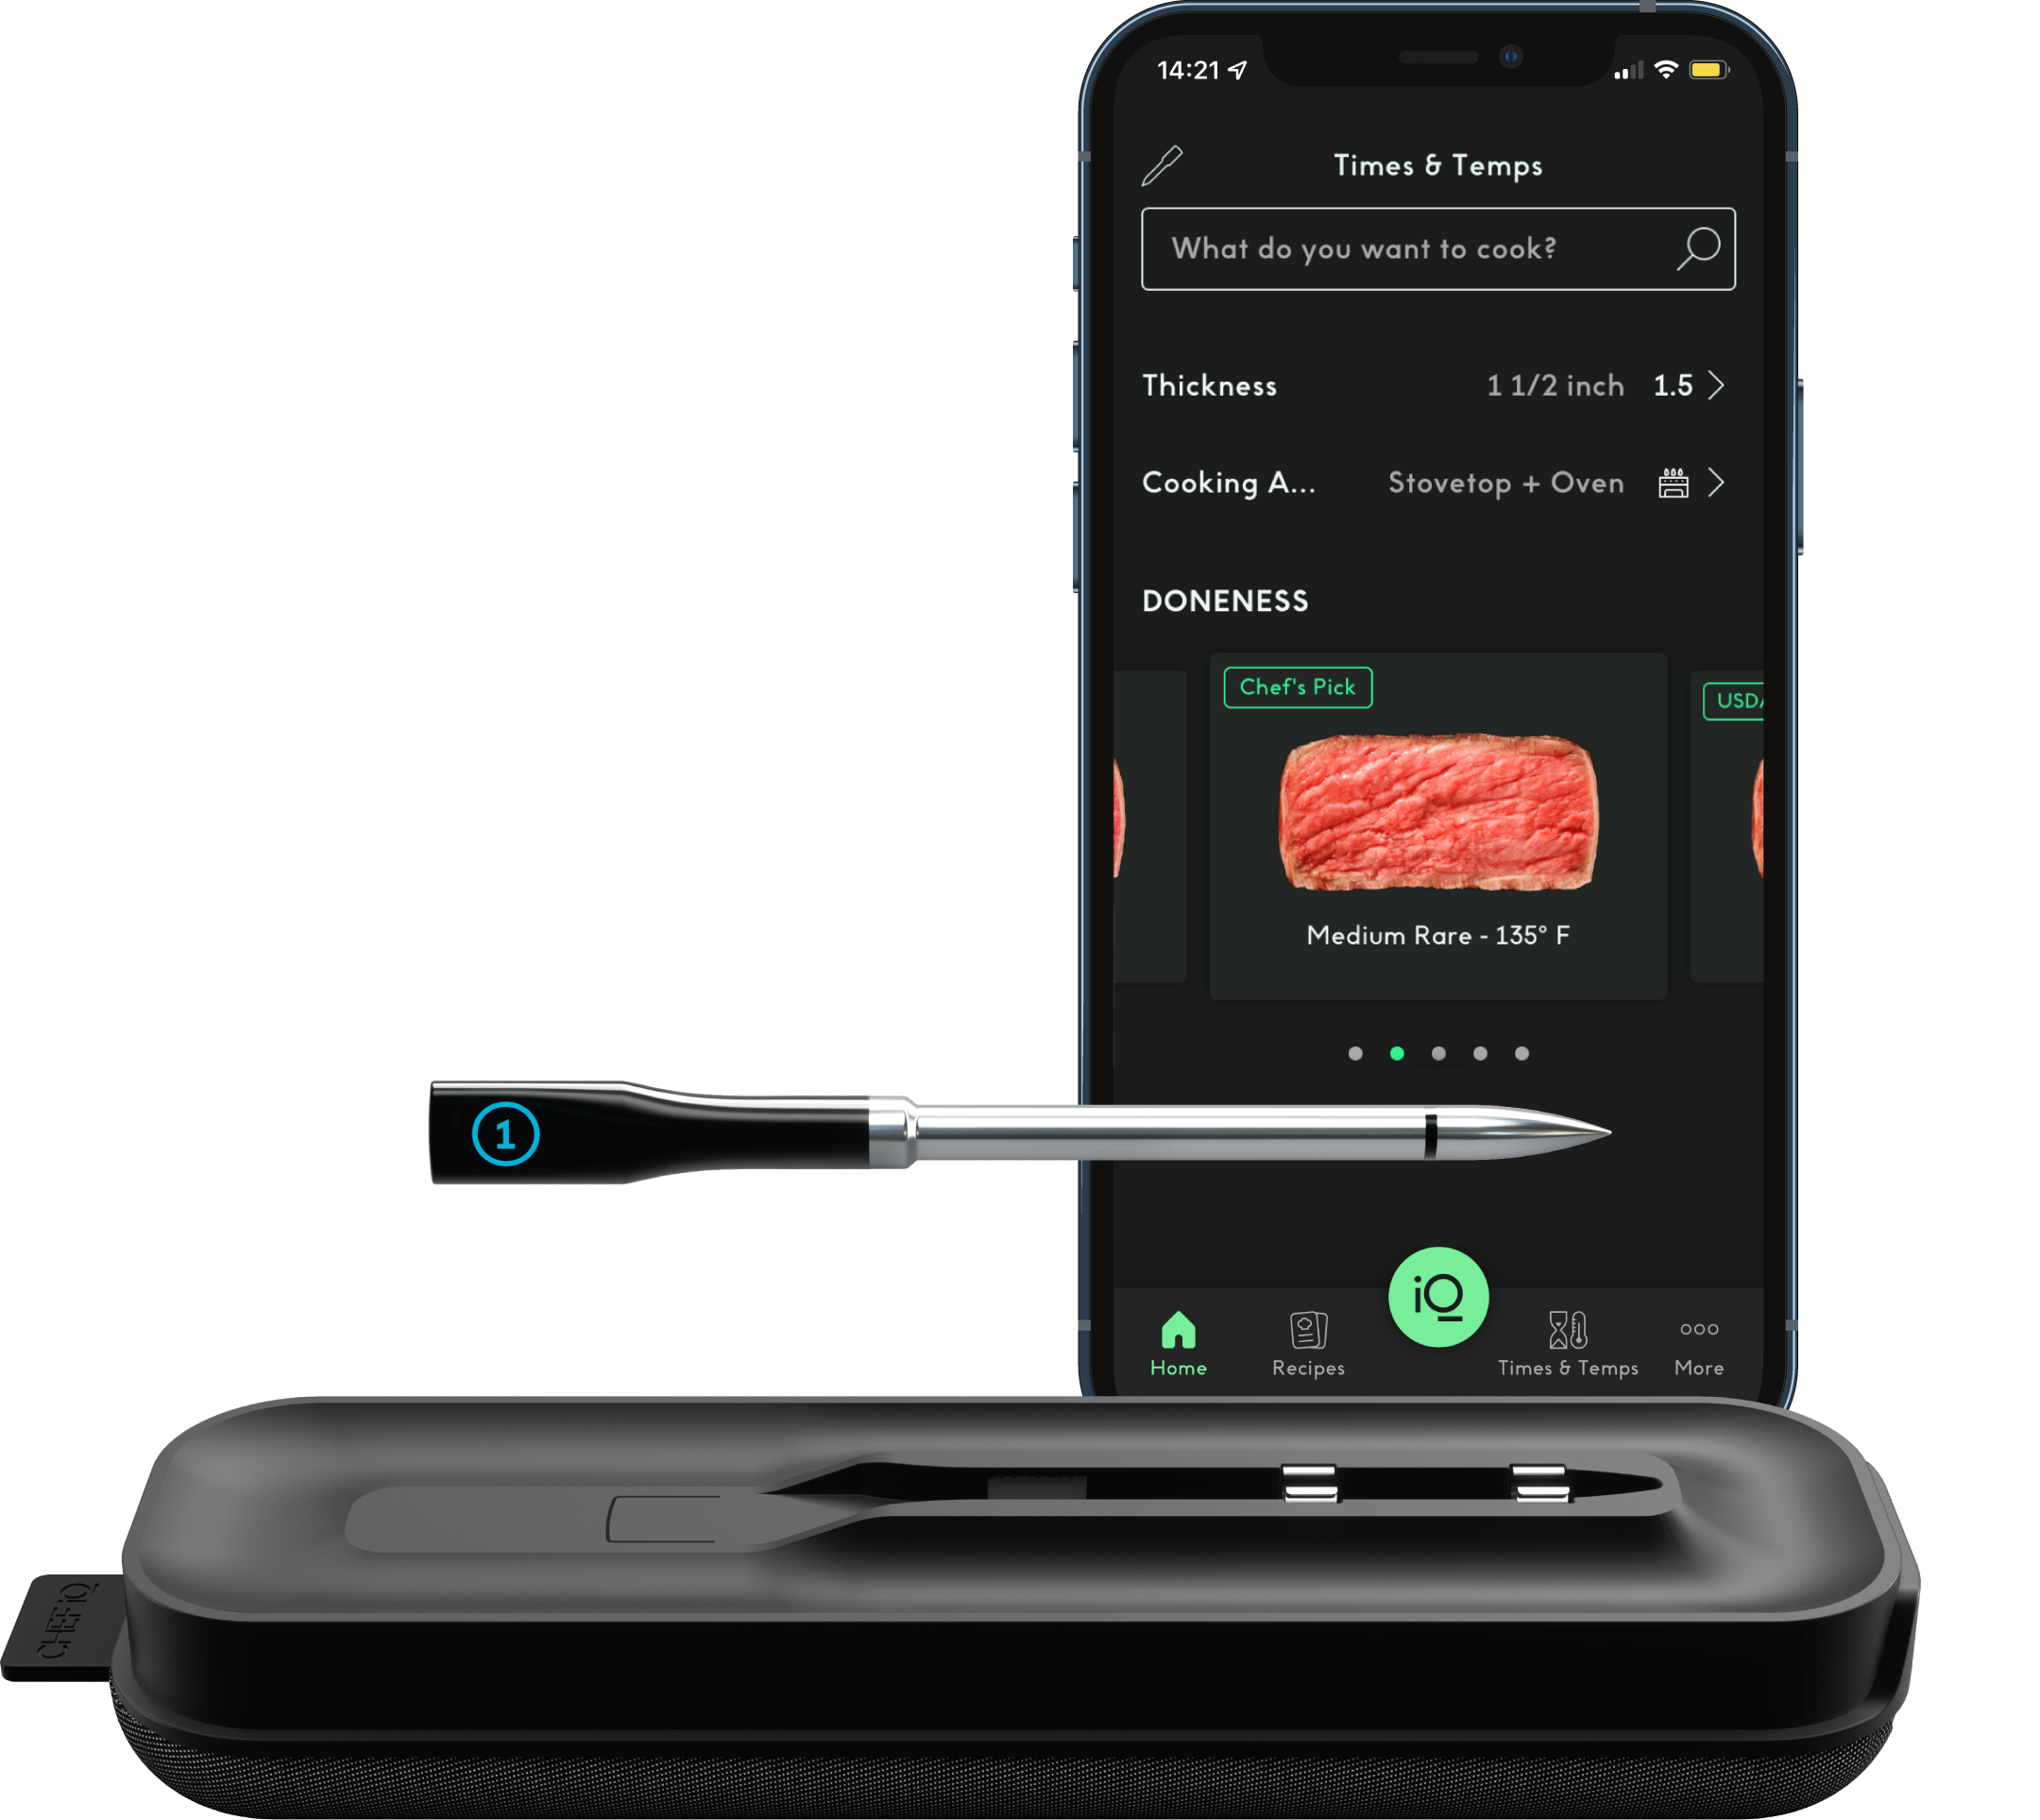 Chef iQ Smart Wireless Meat Thermometer, Unlimited Range